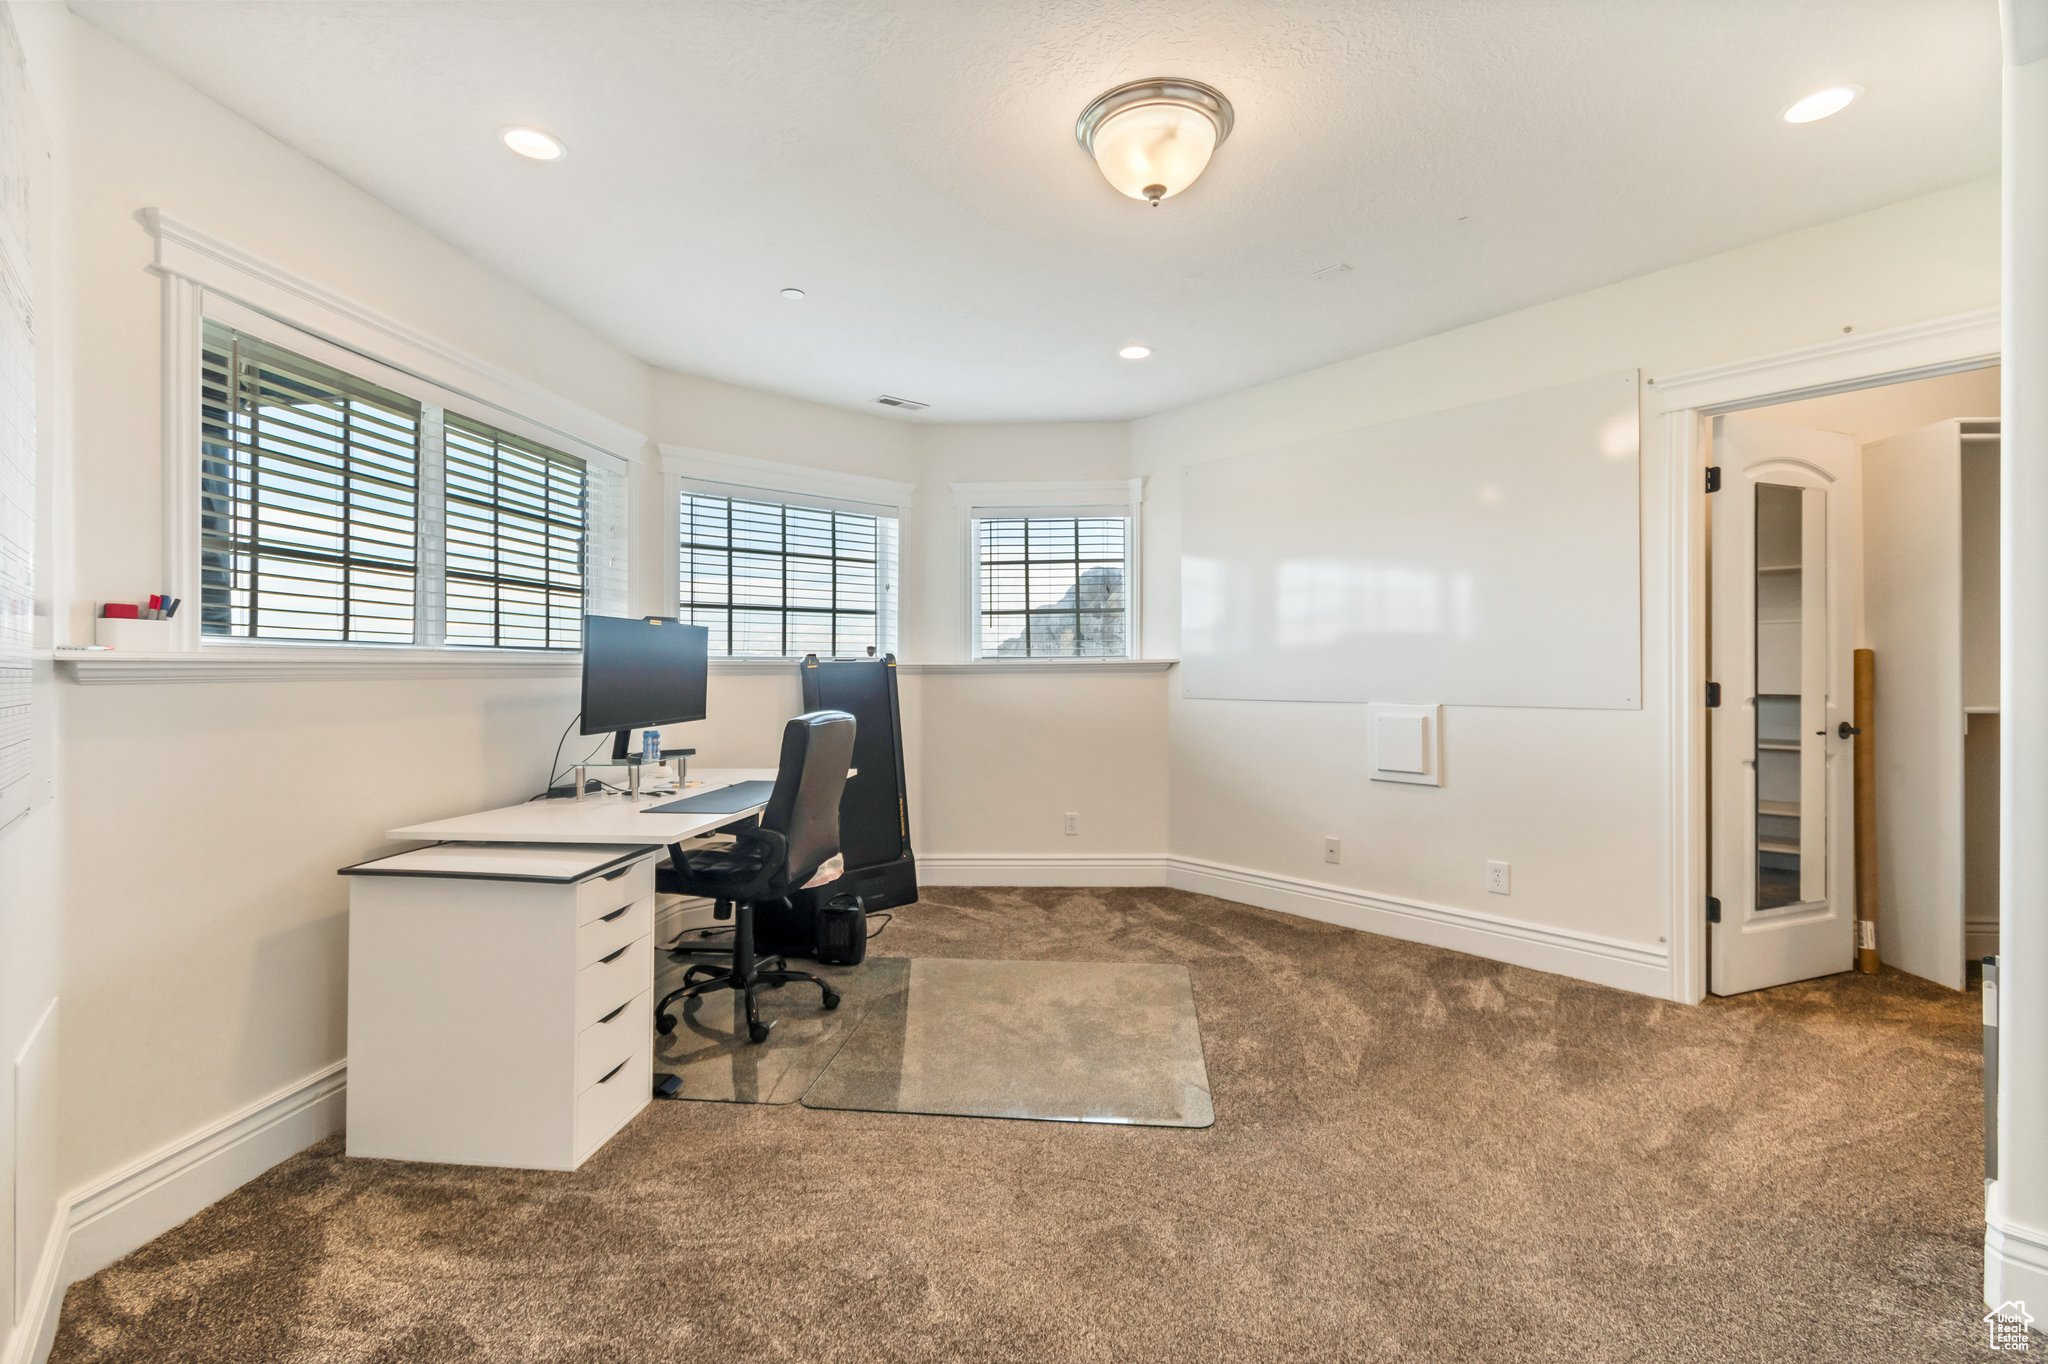 Office with carpet flooring